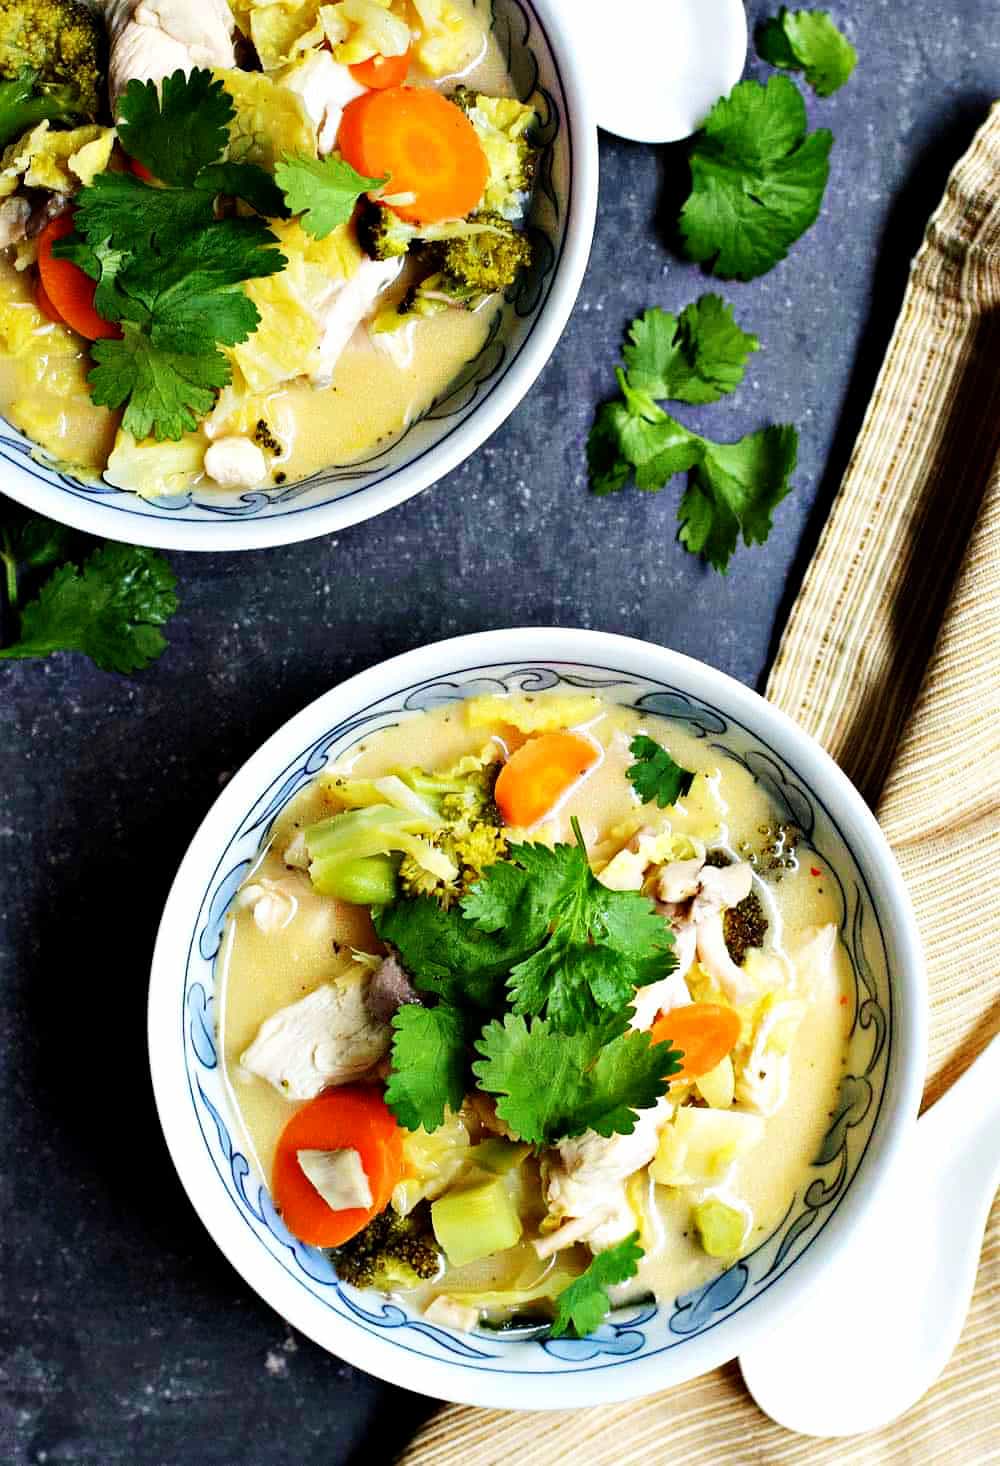 A classic Thai restaurant soup that's easy and fun to make at home!